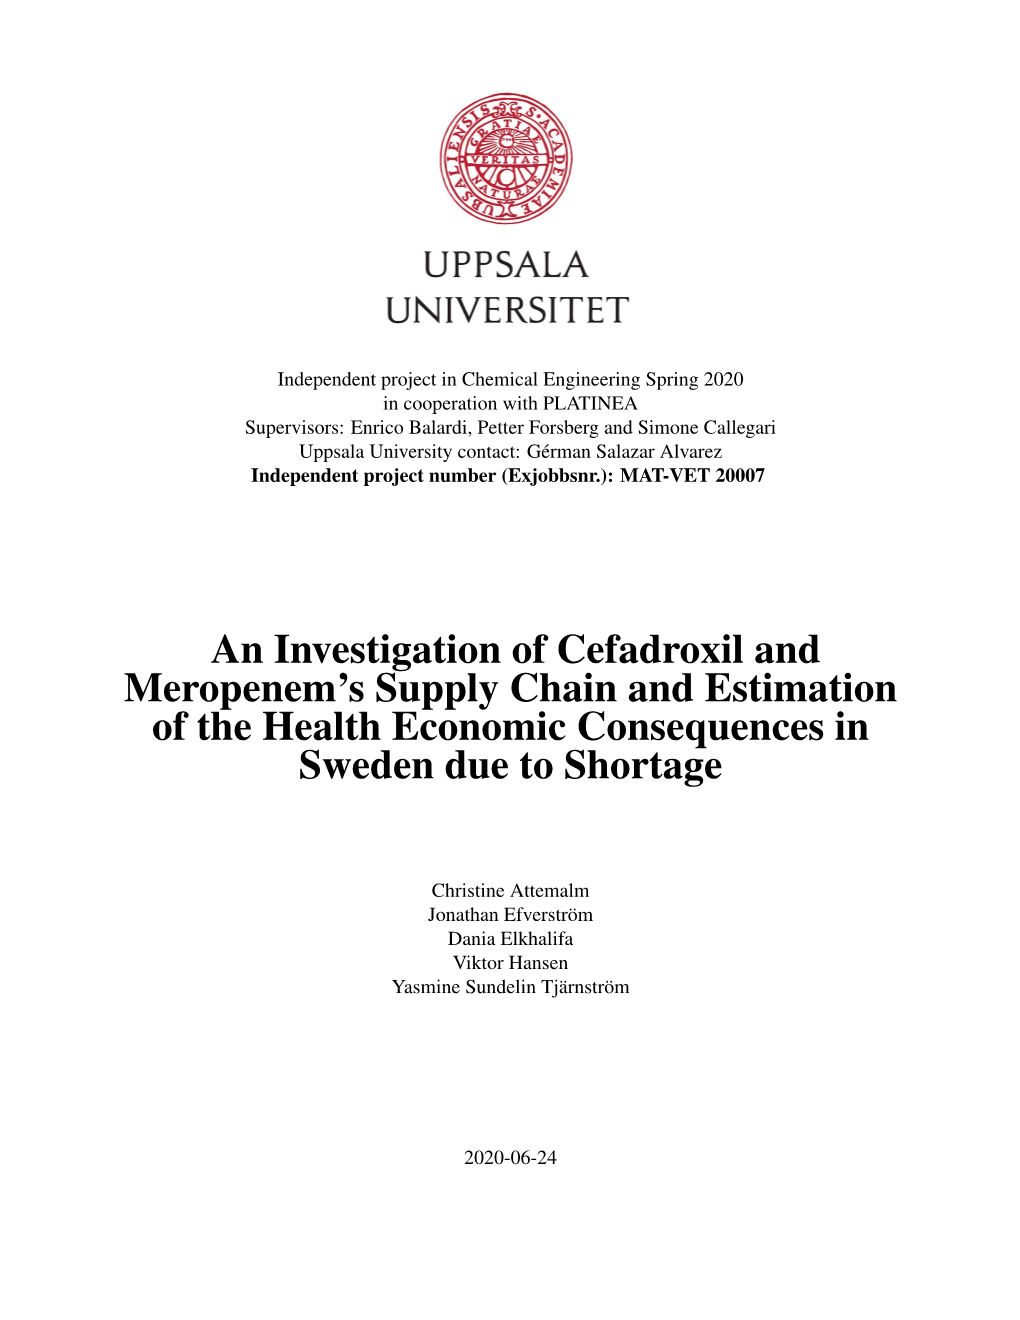 An Investigation of Cefadroxil and Meropenem's Supply Chain and Estimation of the Health Economic Consequences in Sweden Due T